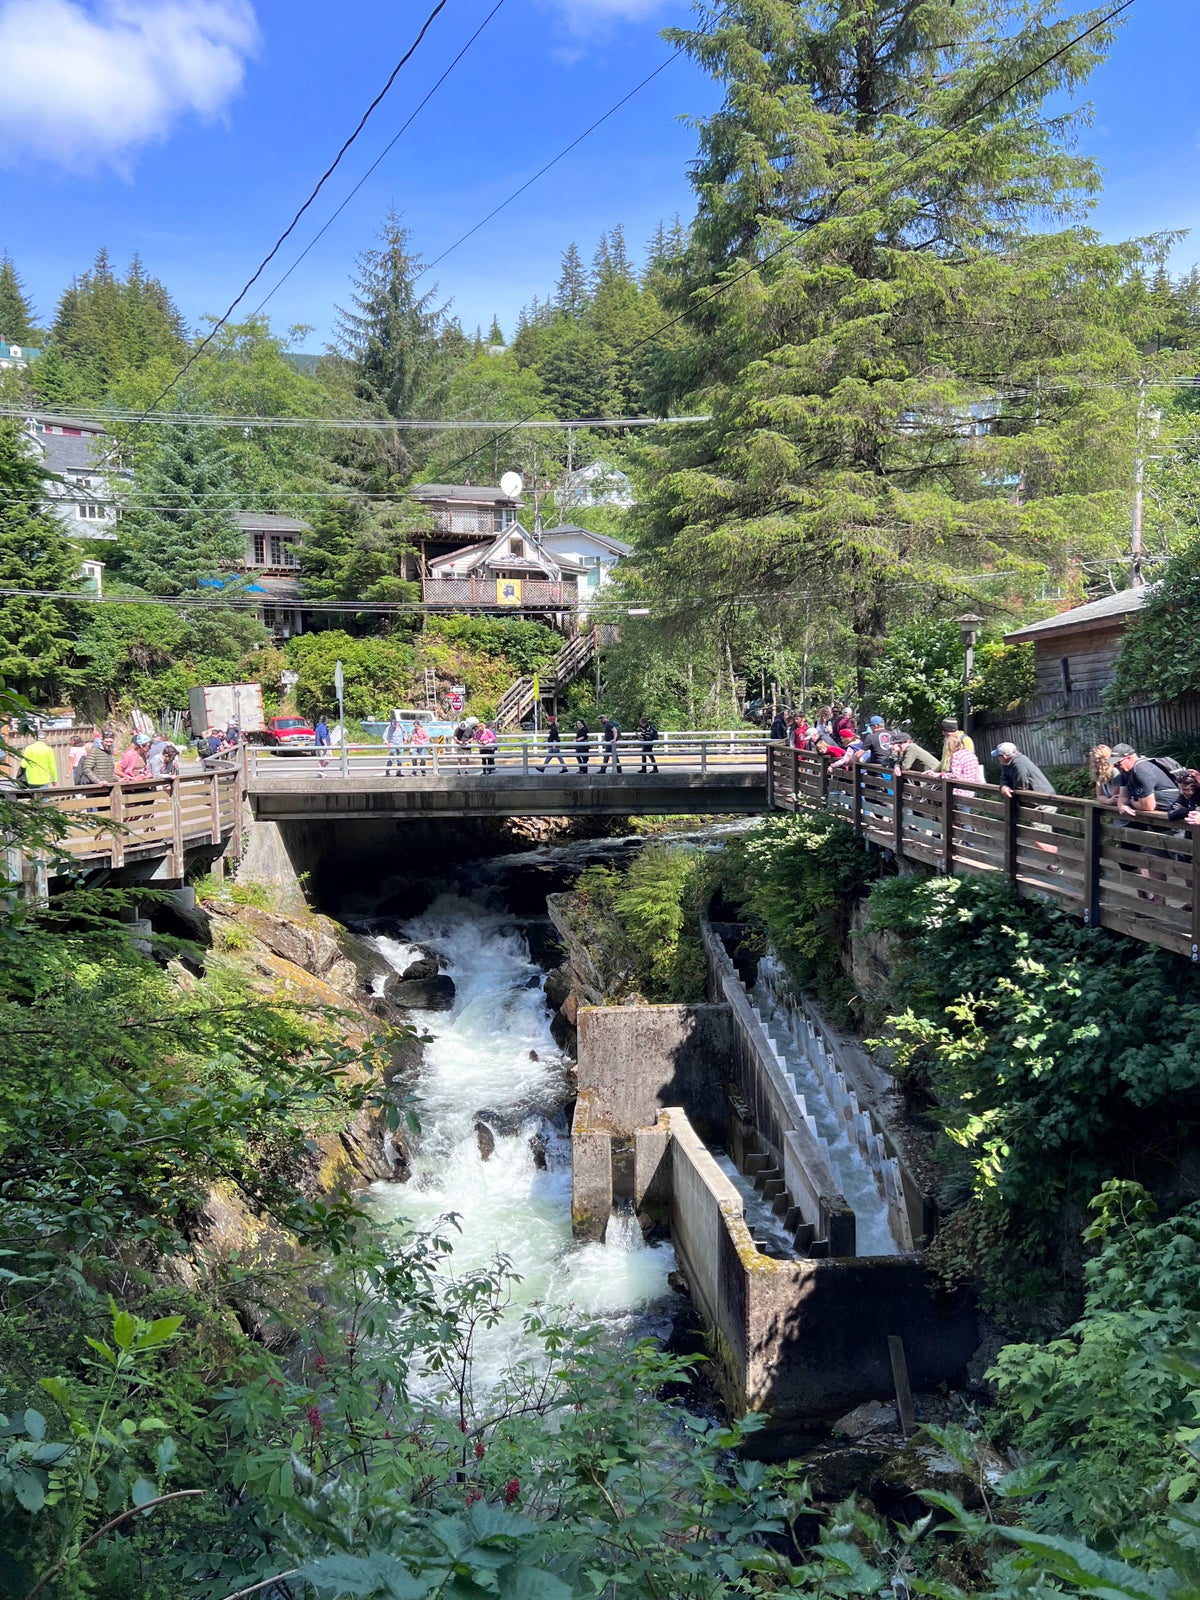 Salmon viewing and fish ladder in Ketchikan